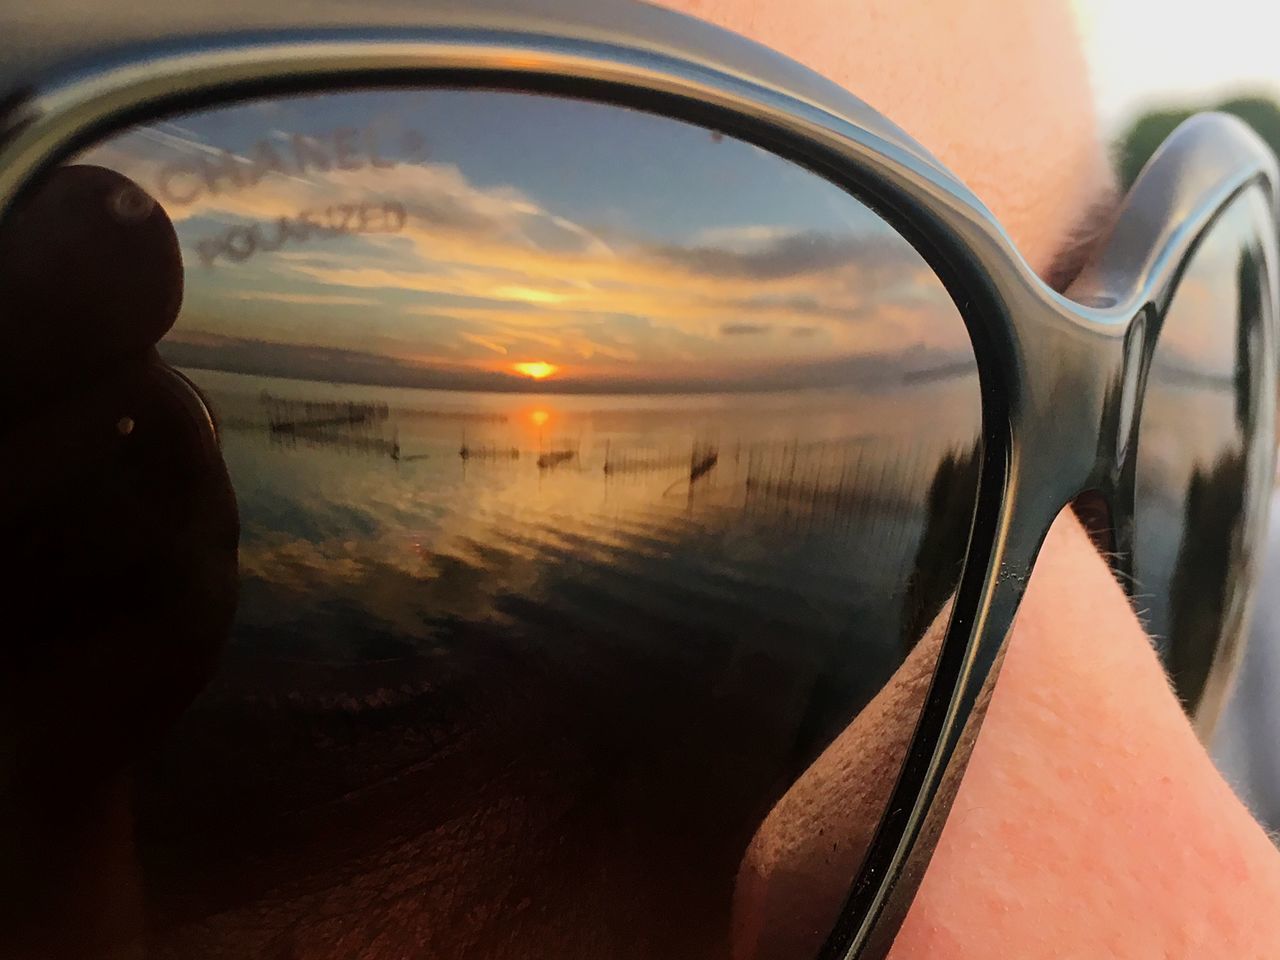 REFLECTION OF MAN IN SUNGLASSES ON BEACH DURING SUNSET